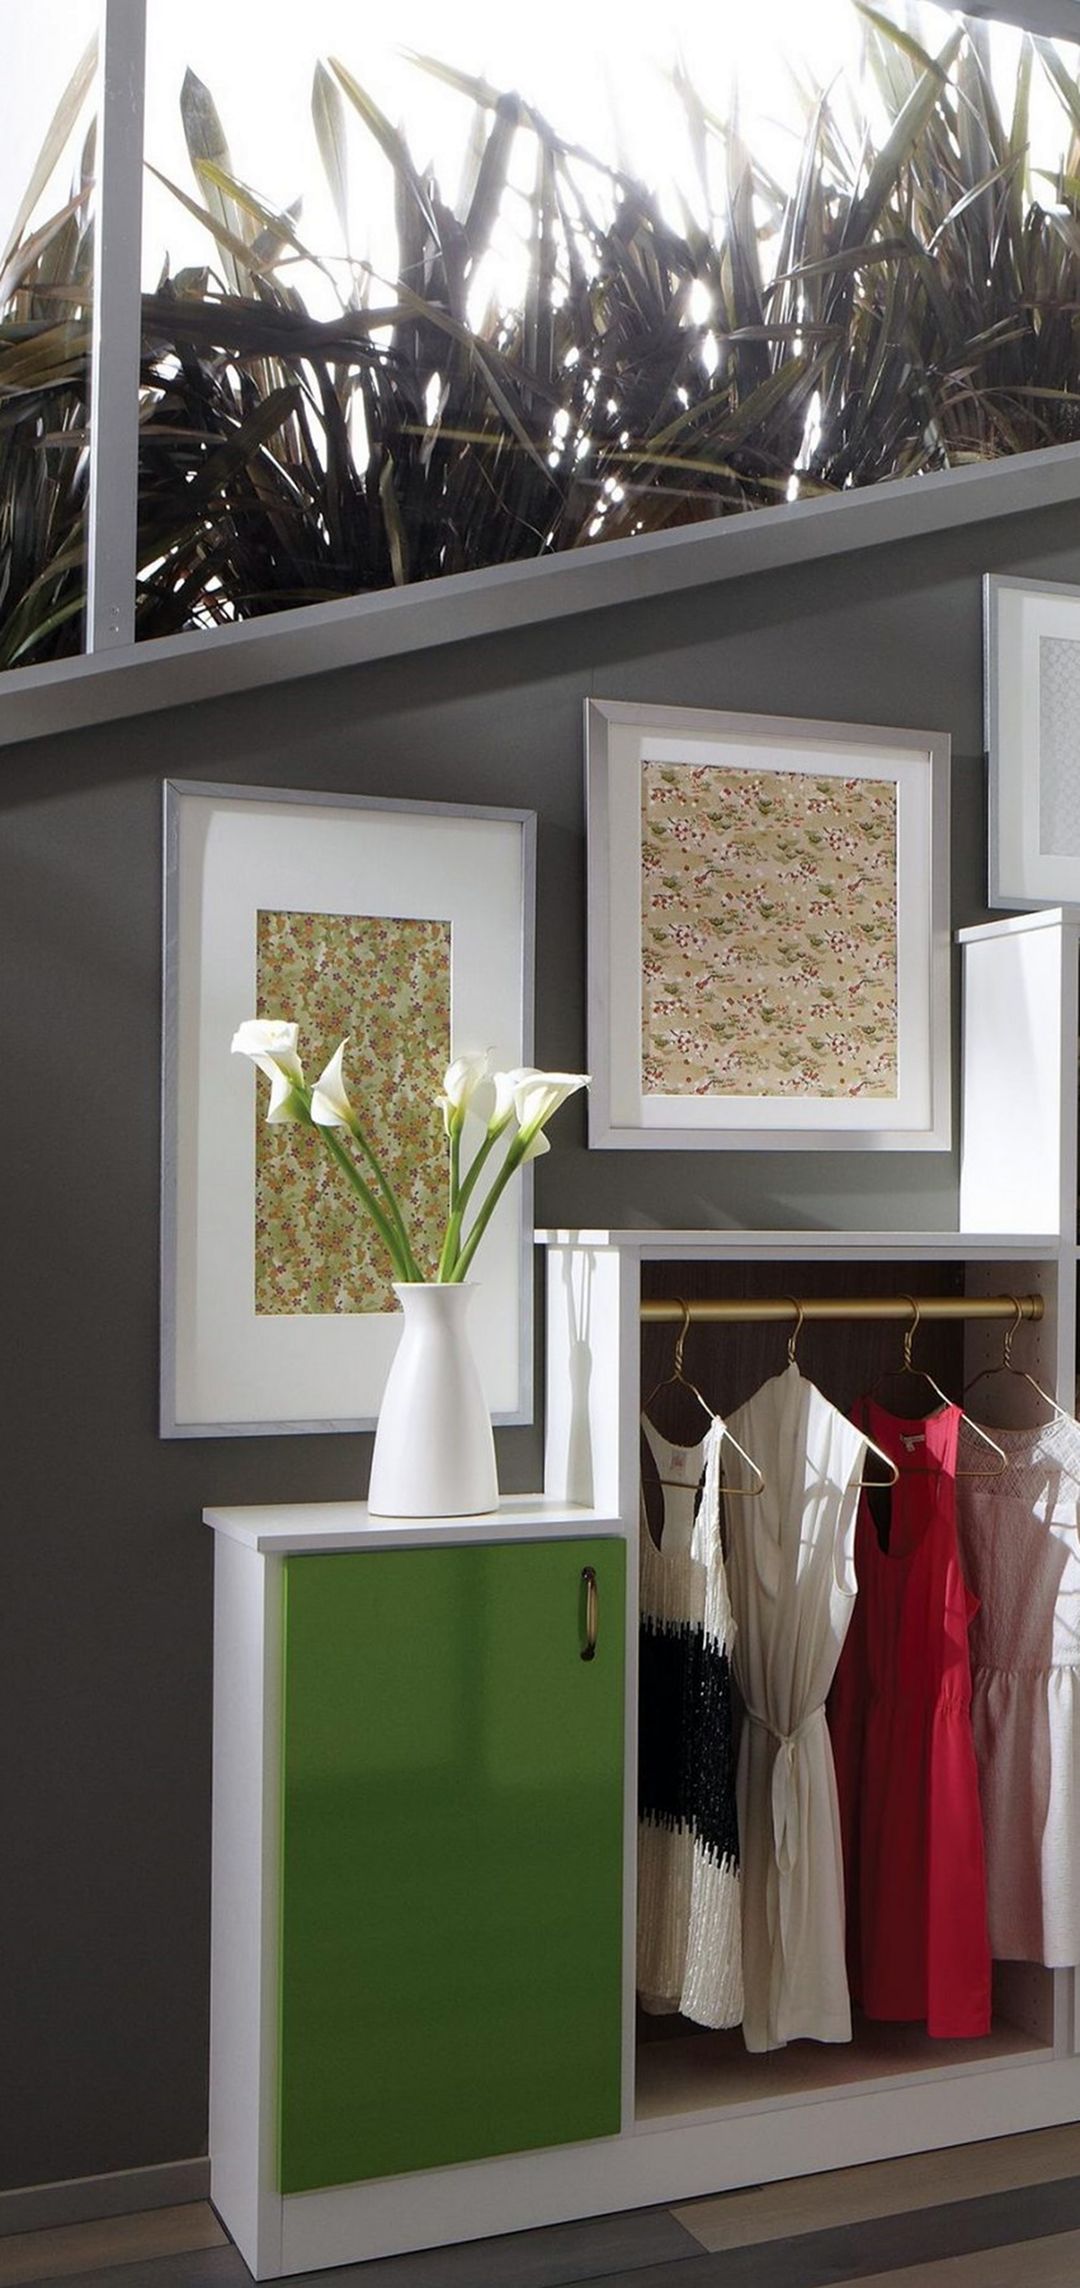 Sunlight With Wall And Plant Accessories In Wardrobe Limited Room